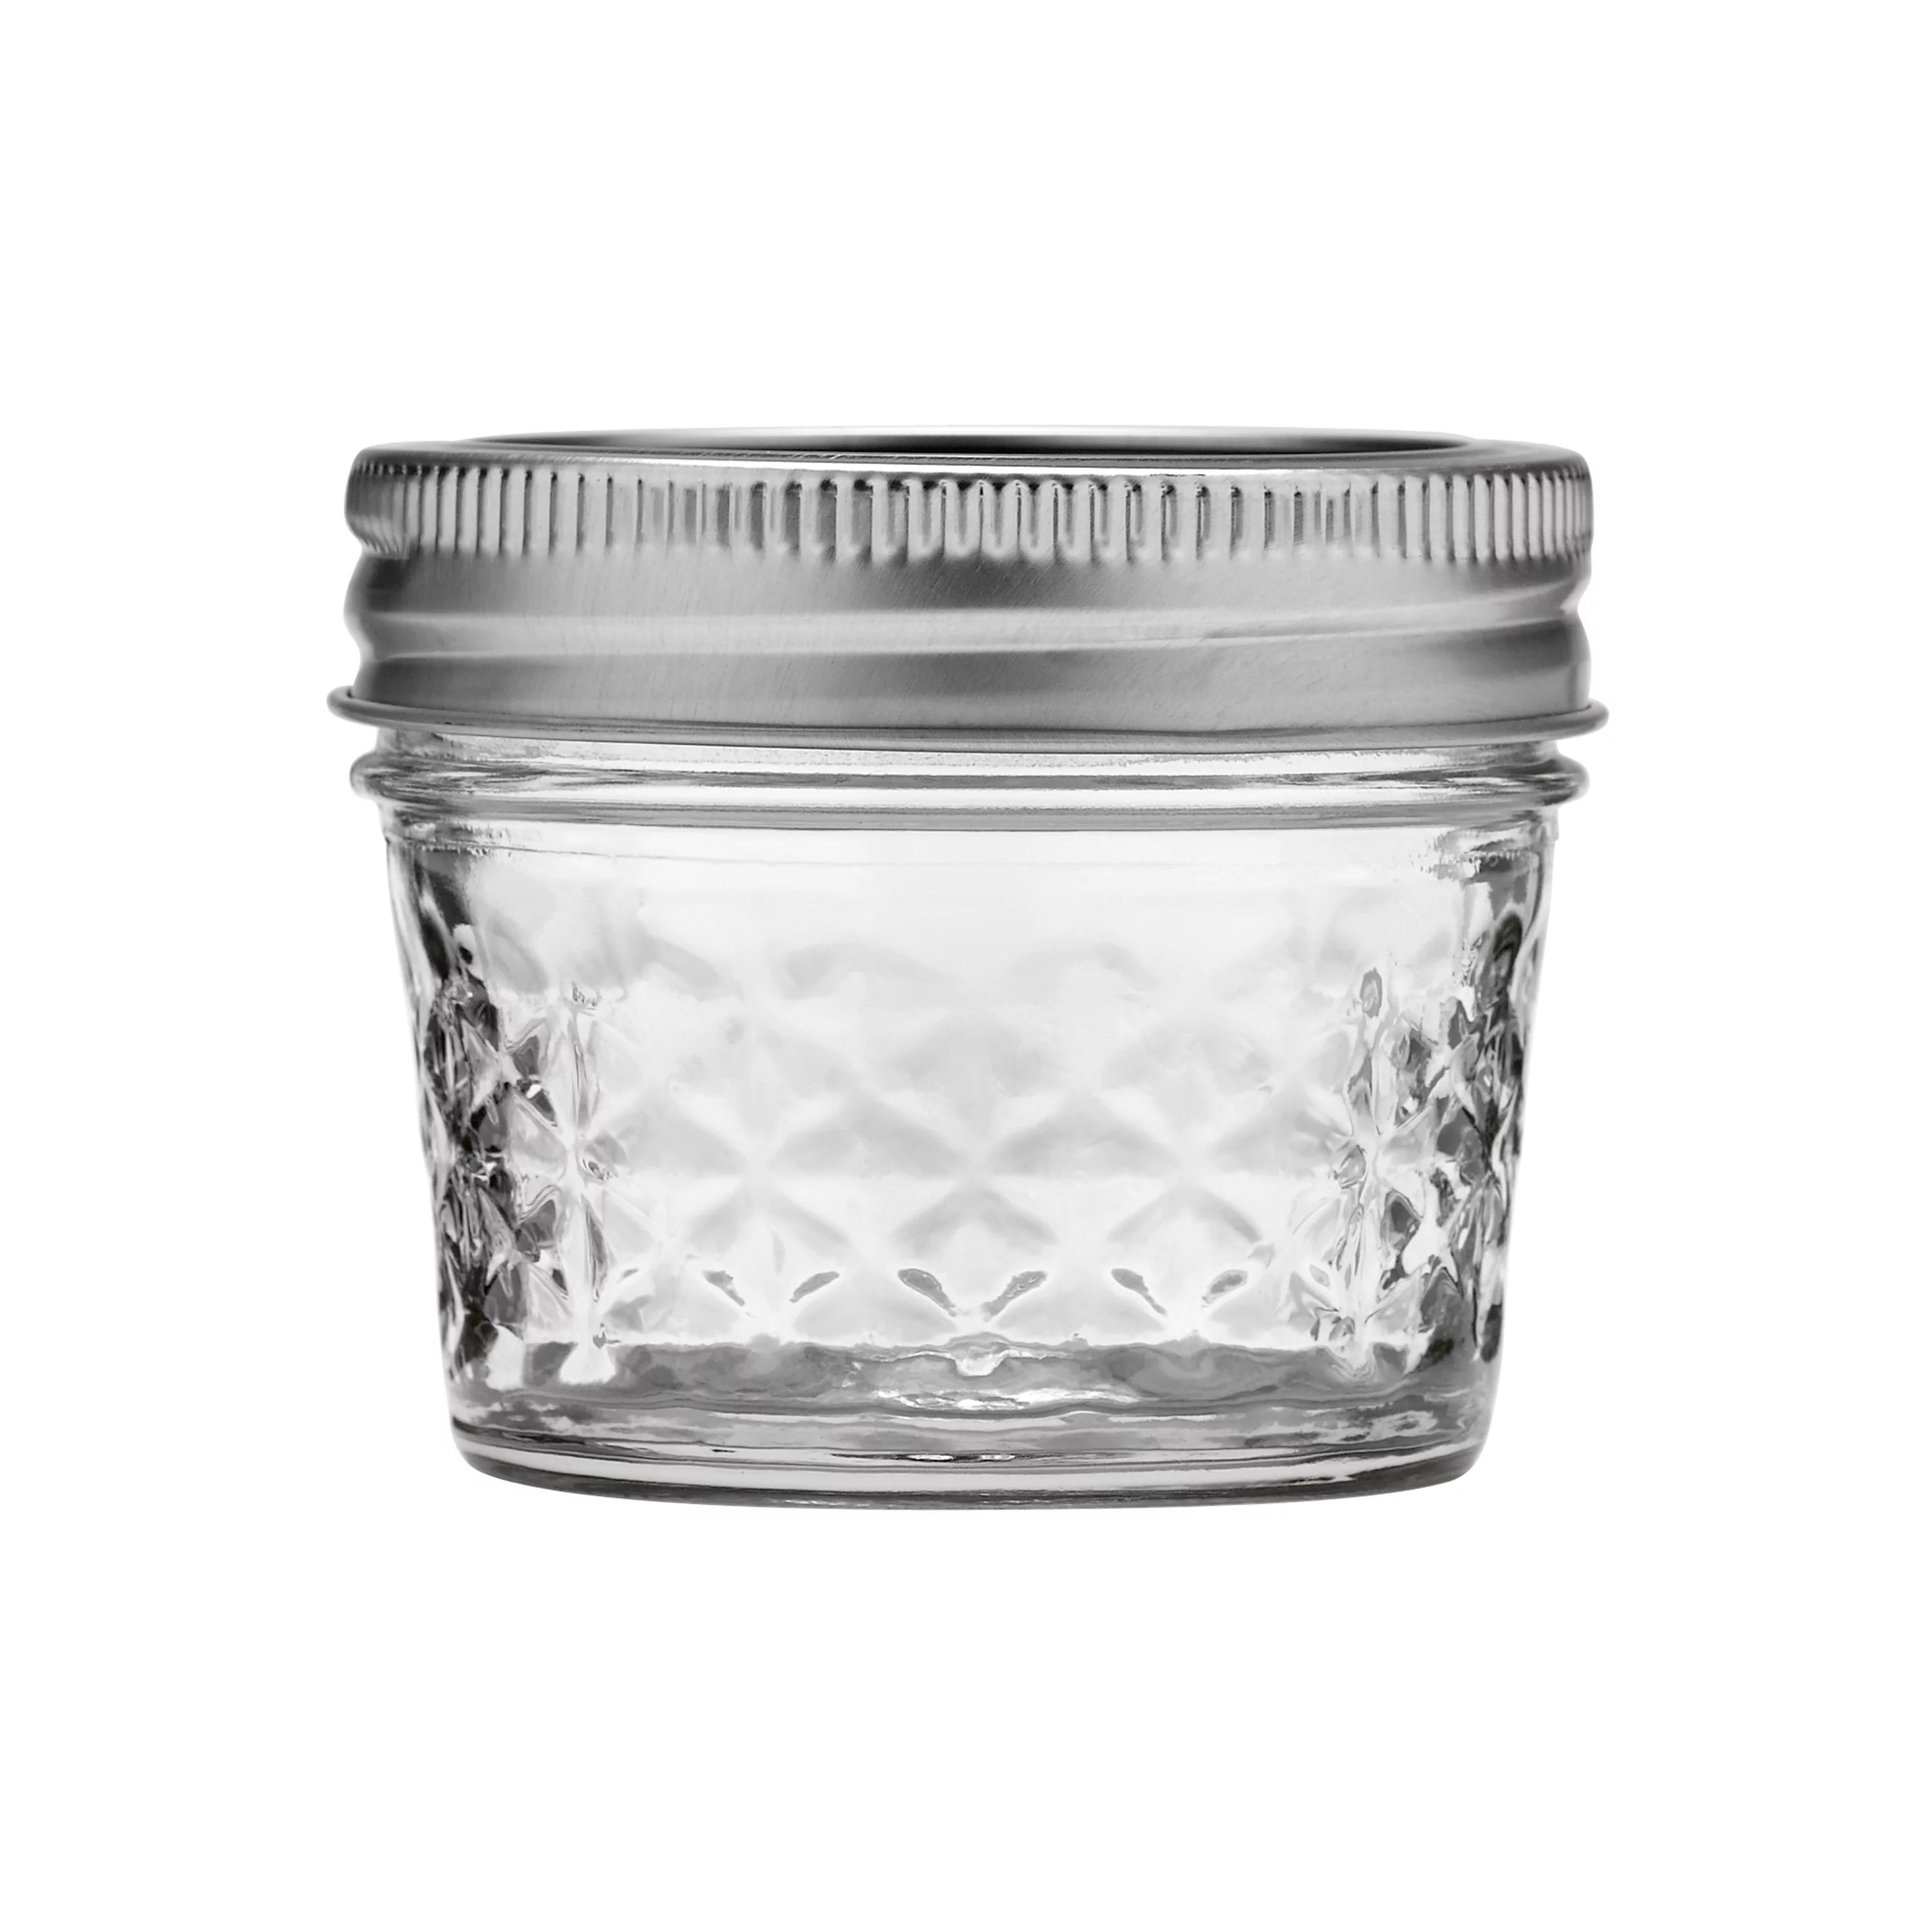 Ball, Quilted Crystal Class Mason Jars, Regular Mouth, 4 oz, 12 Pack | Walmart (US)